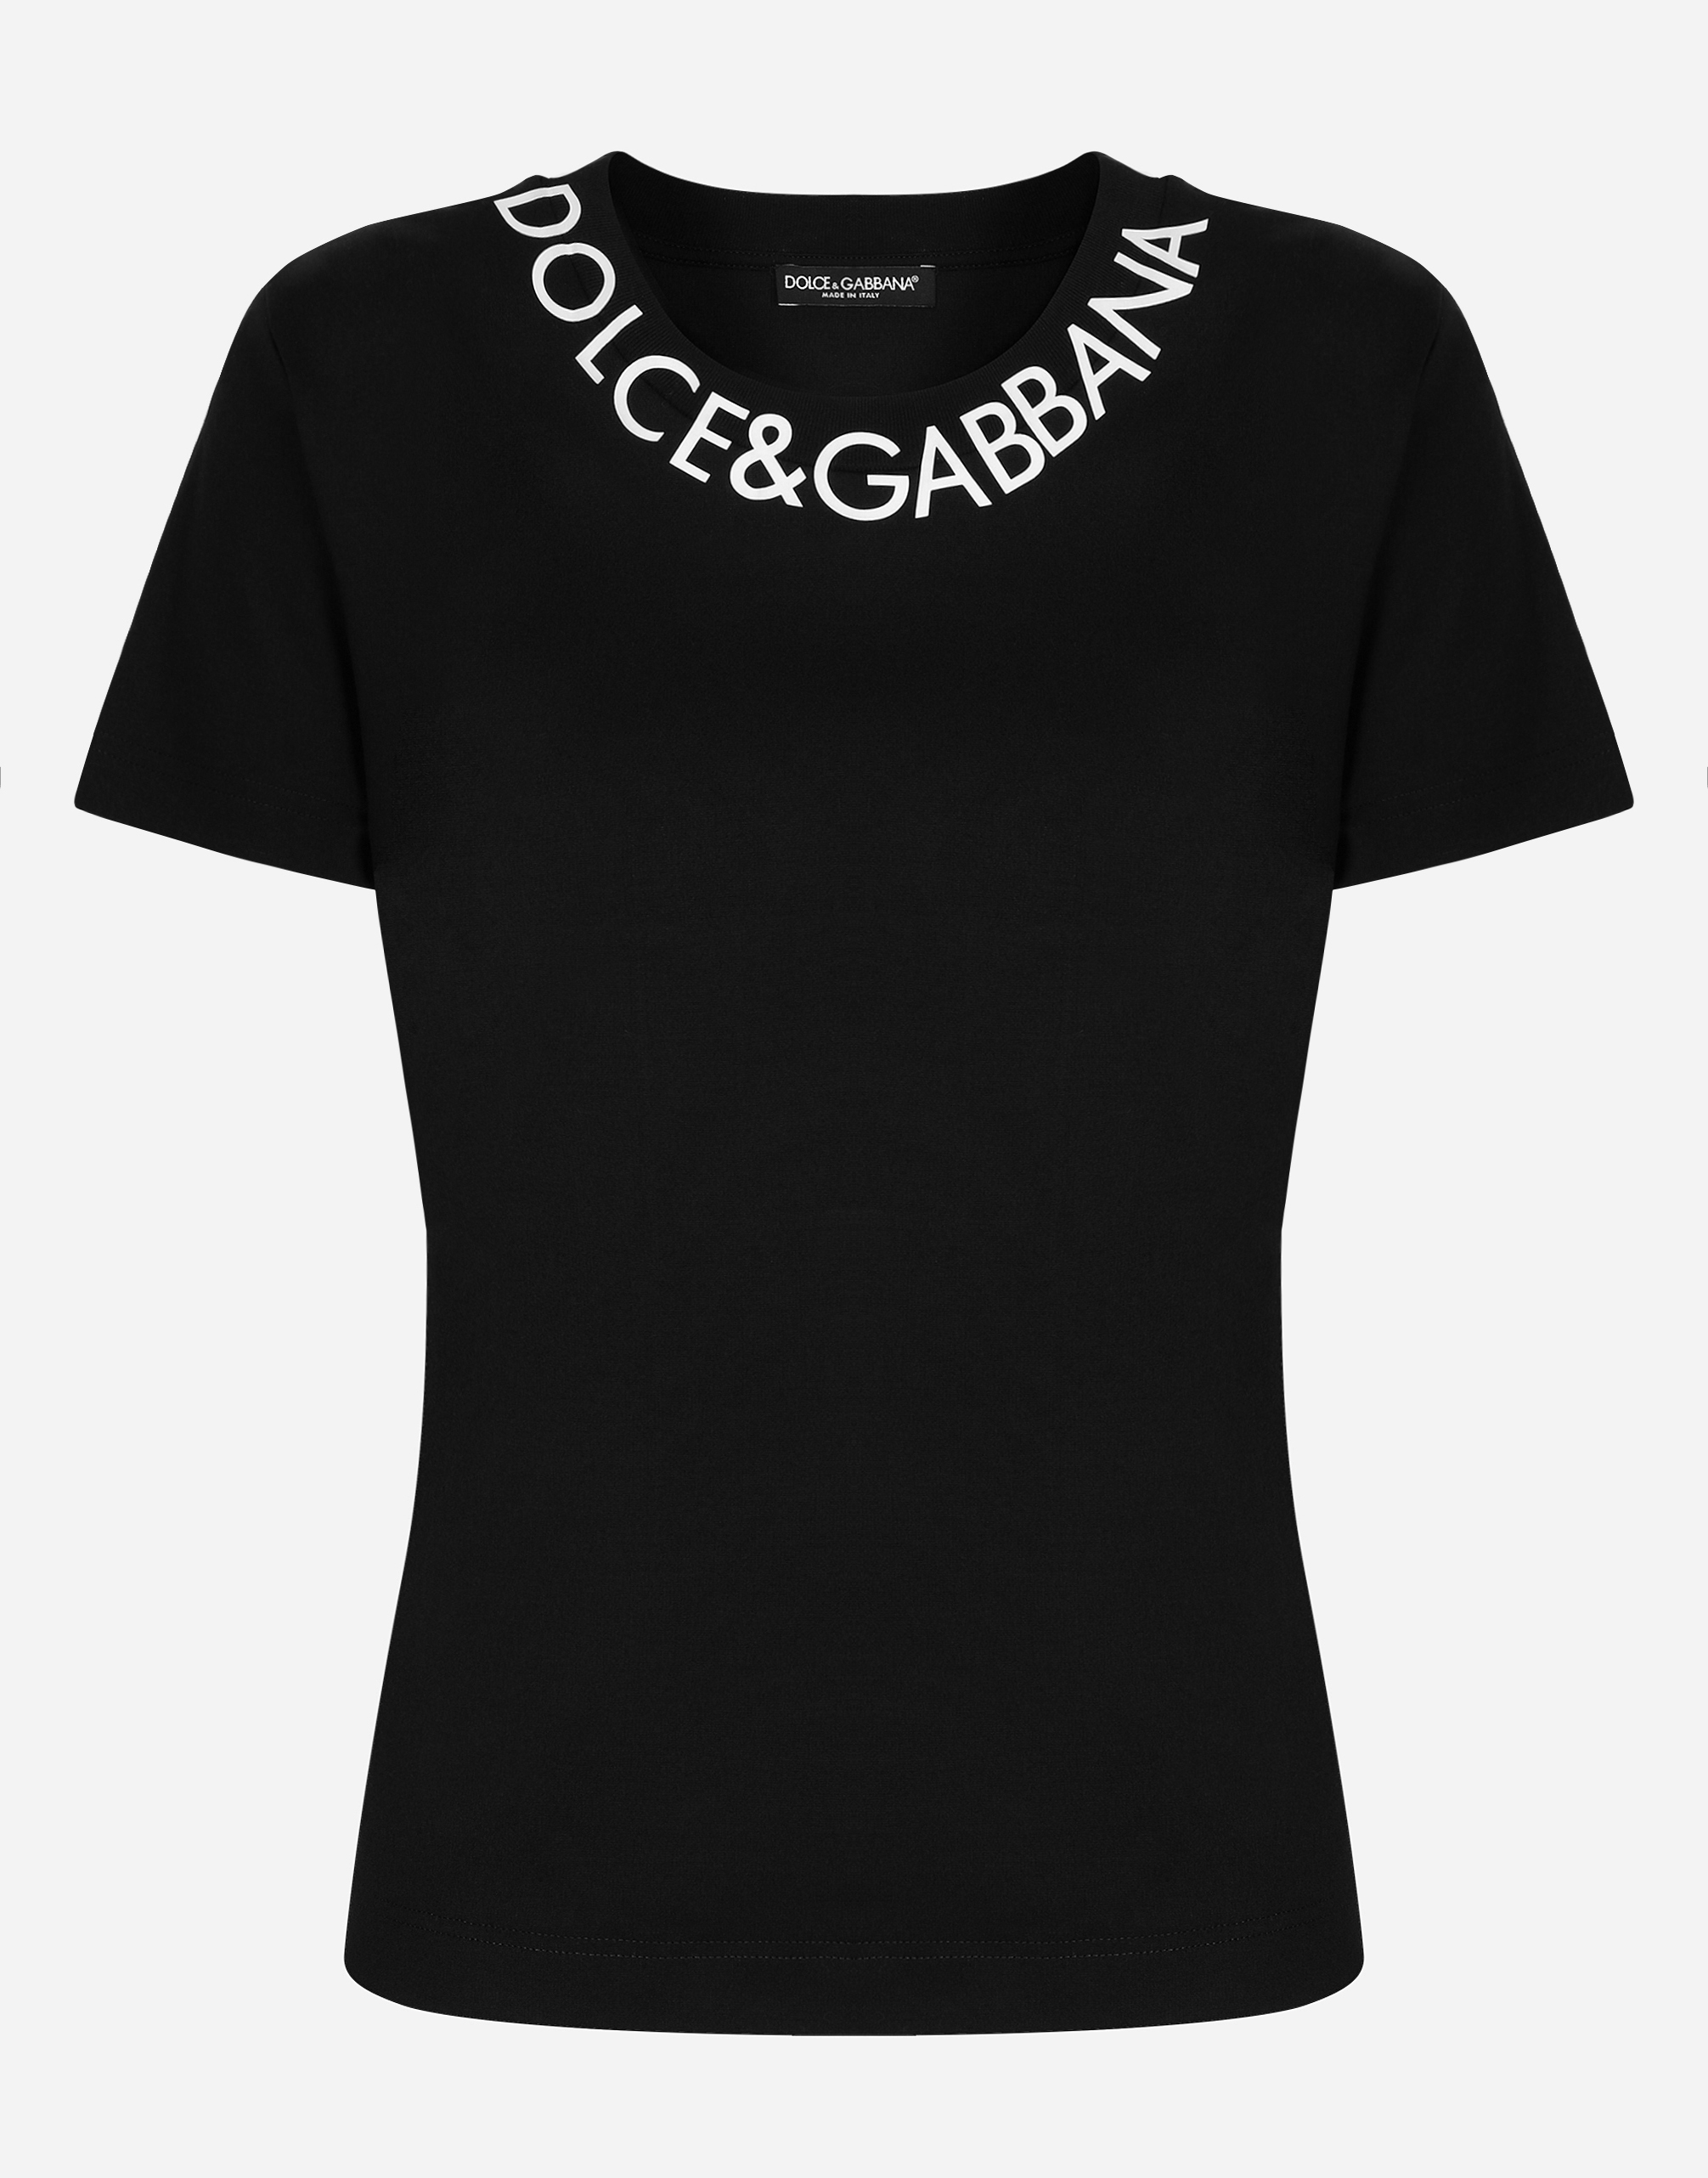 Jersey T-shirt with logo embroidery on neck in Black